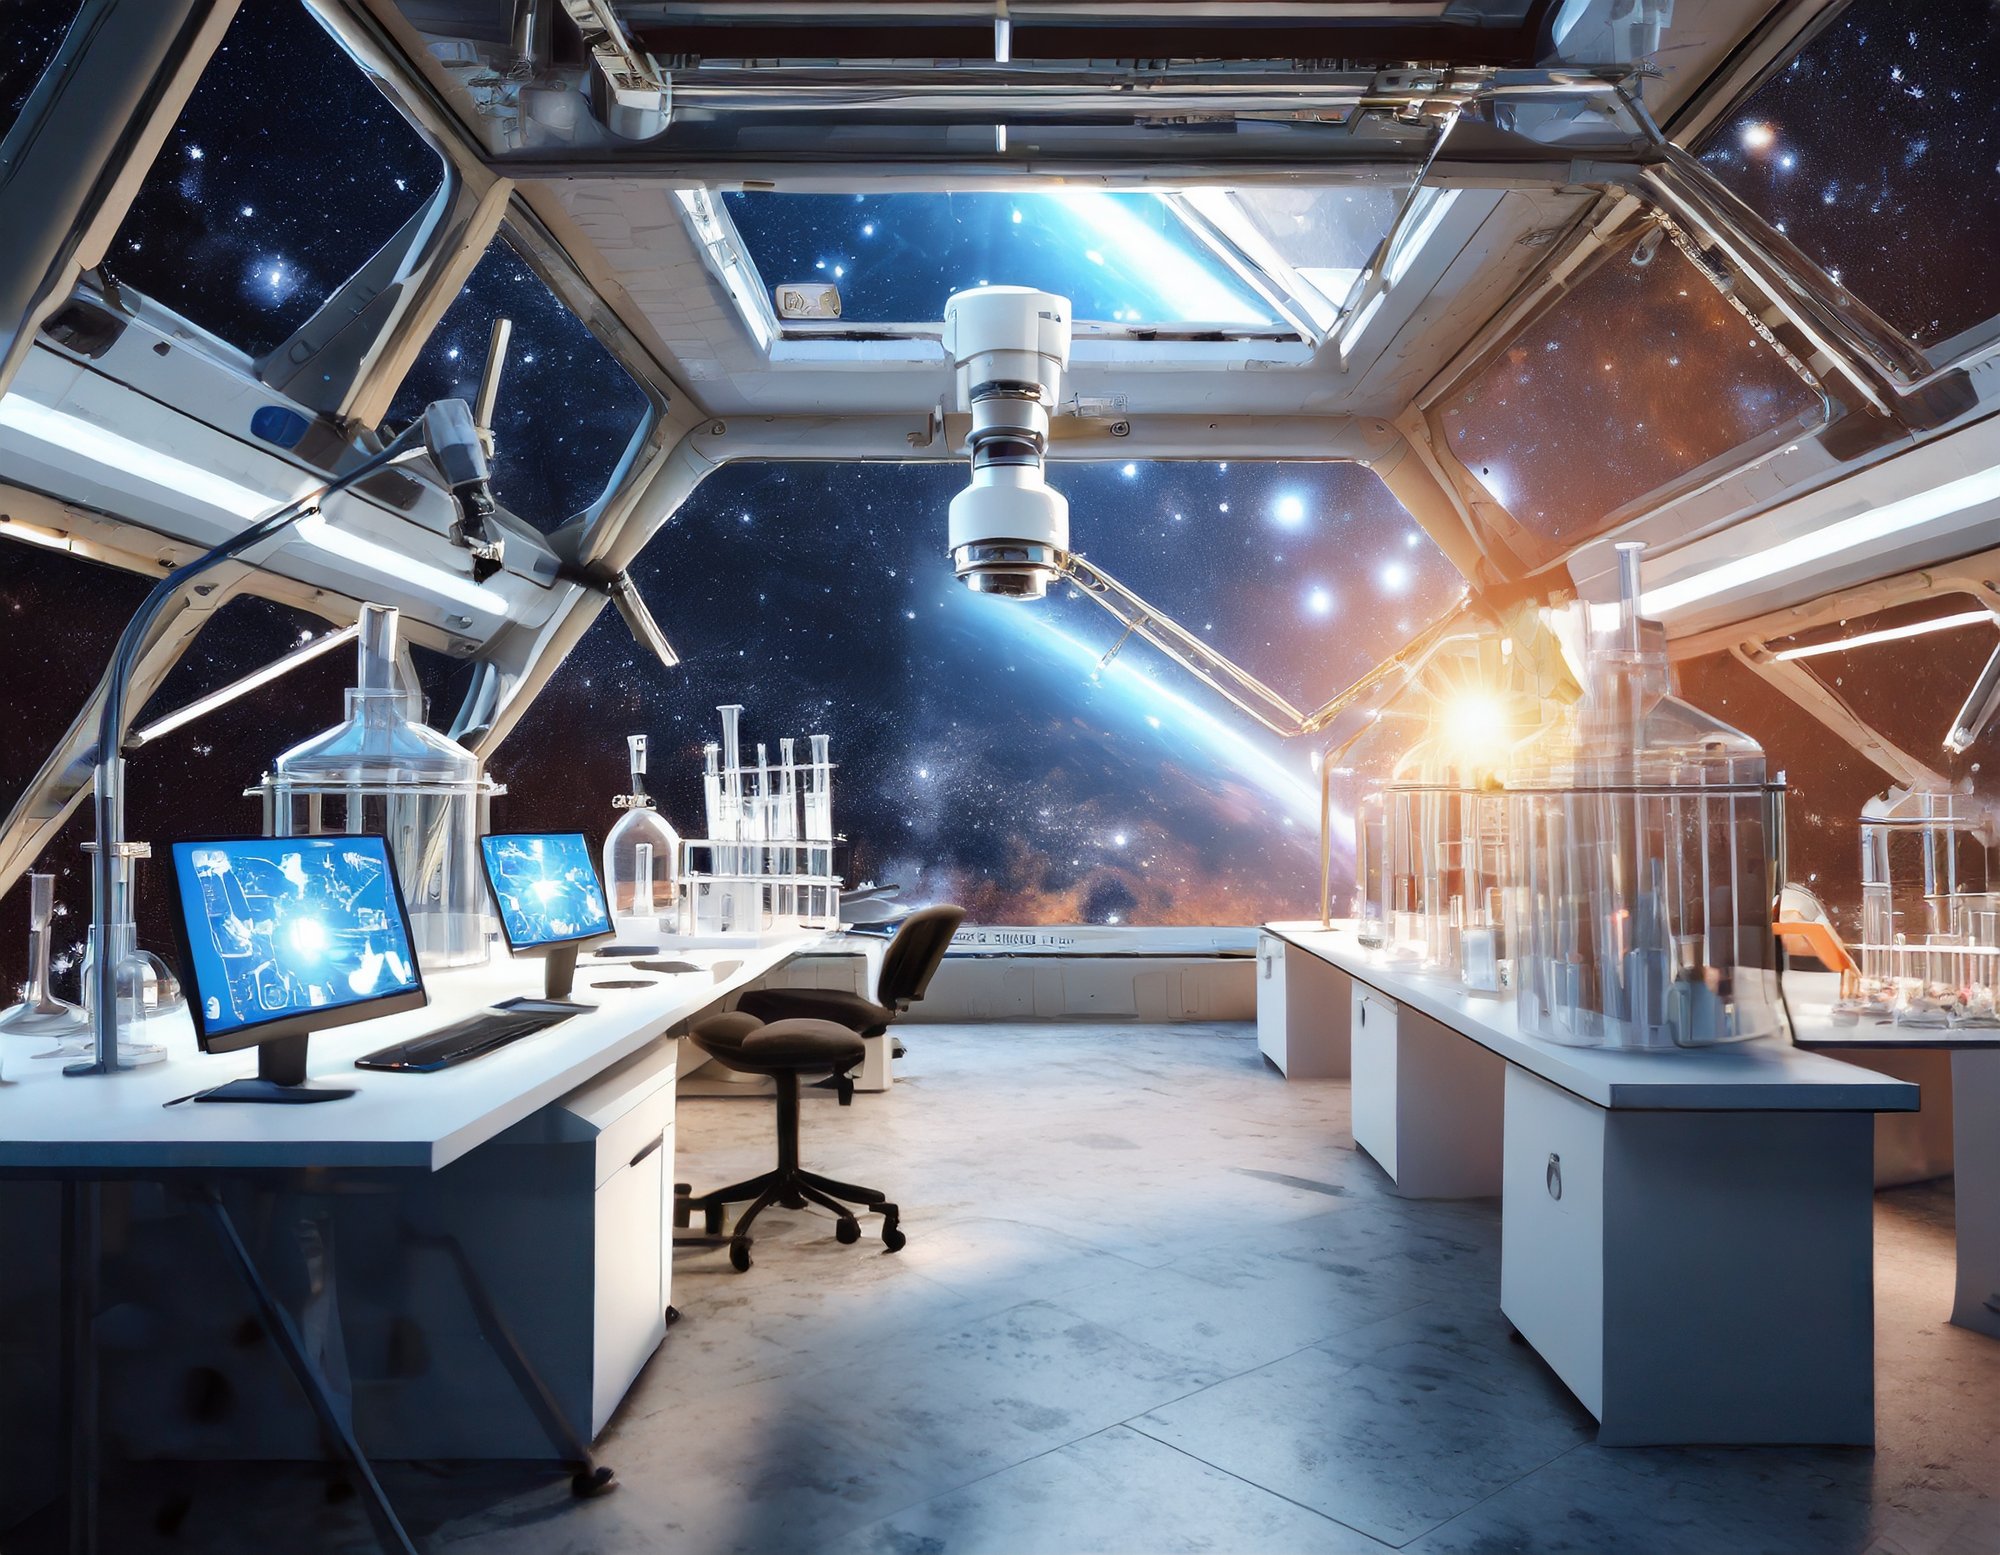 Firefly lab in space 88410